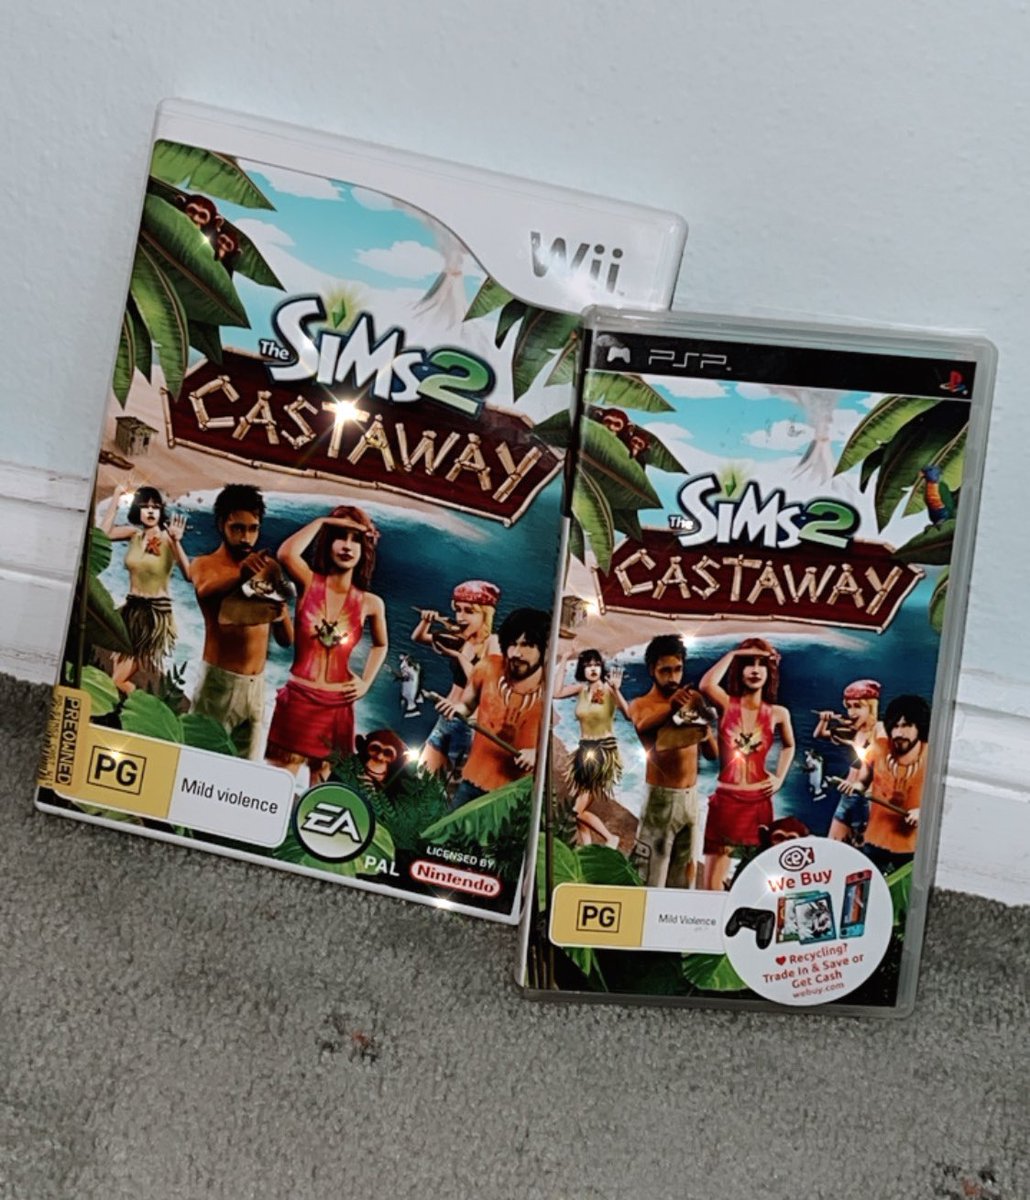 Randomly Walked into a Thrift Store and Came across The Sims 2 Castaway on both Wii and PSP for $3😭😍